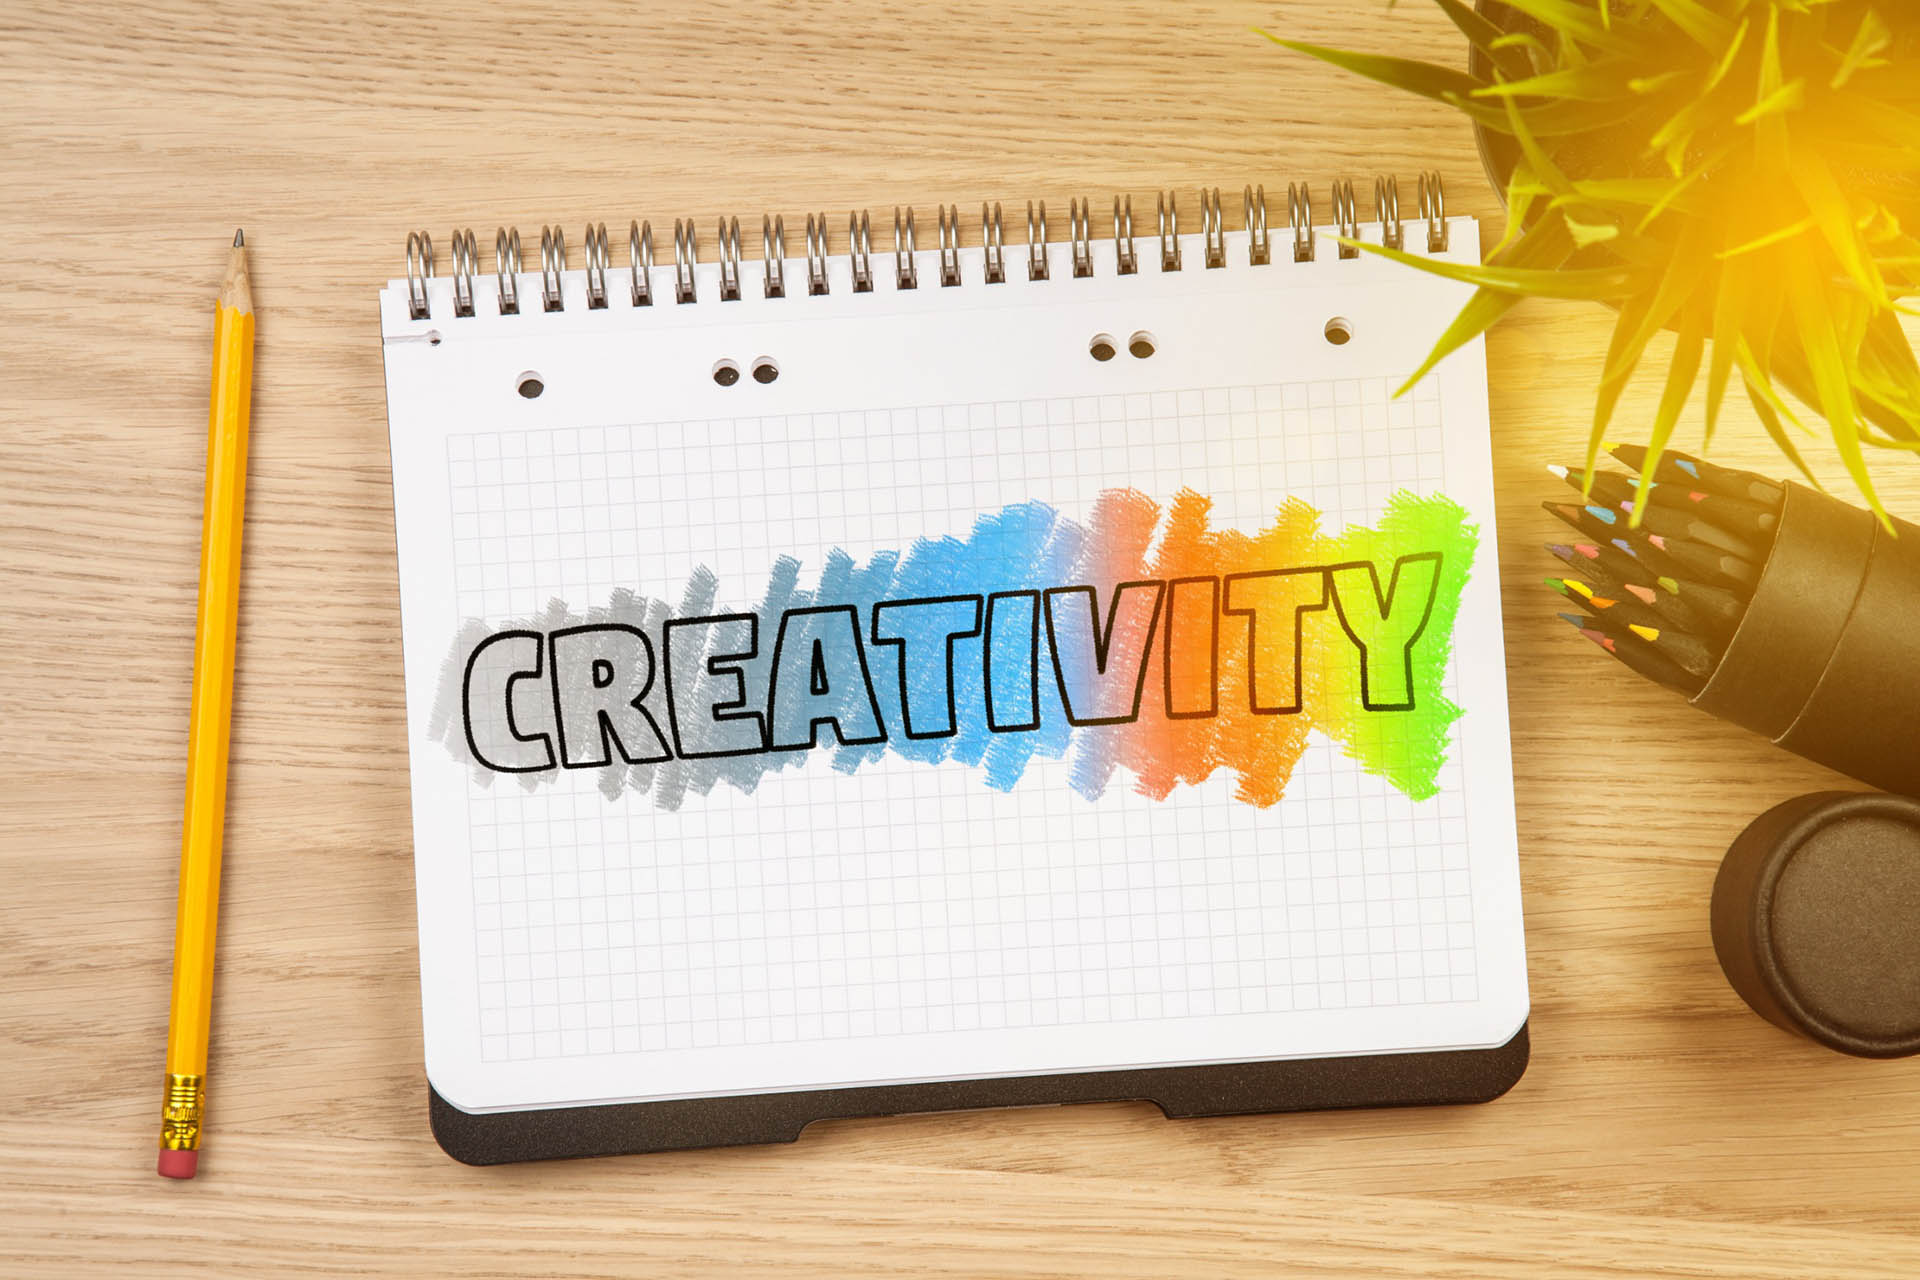 Notepad with the word “creativity” next to a pencil, plant, and cup of colored pencils.